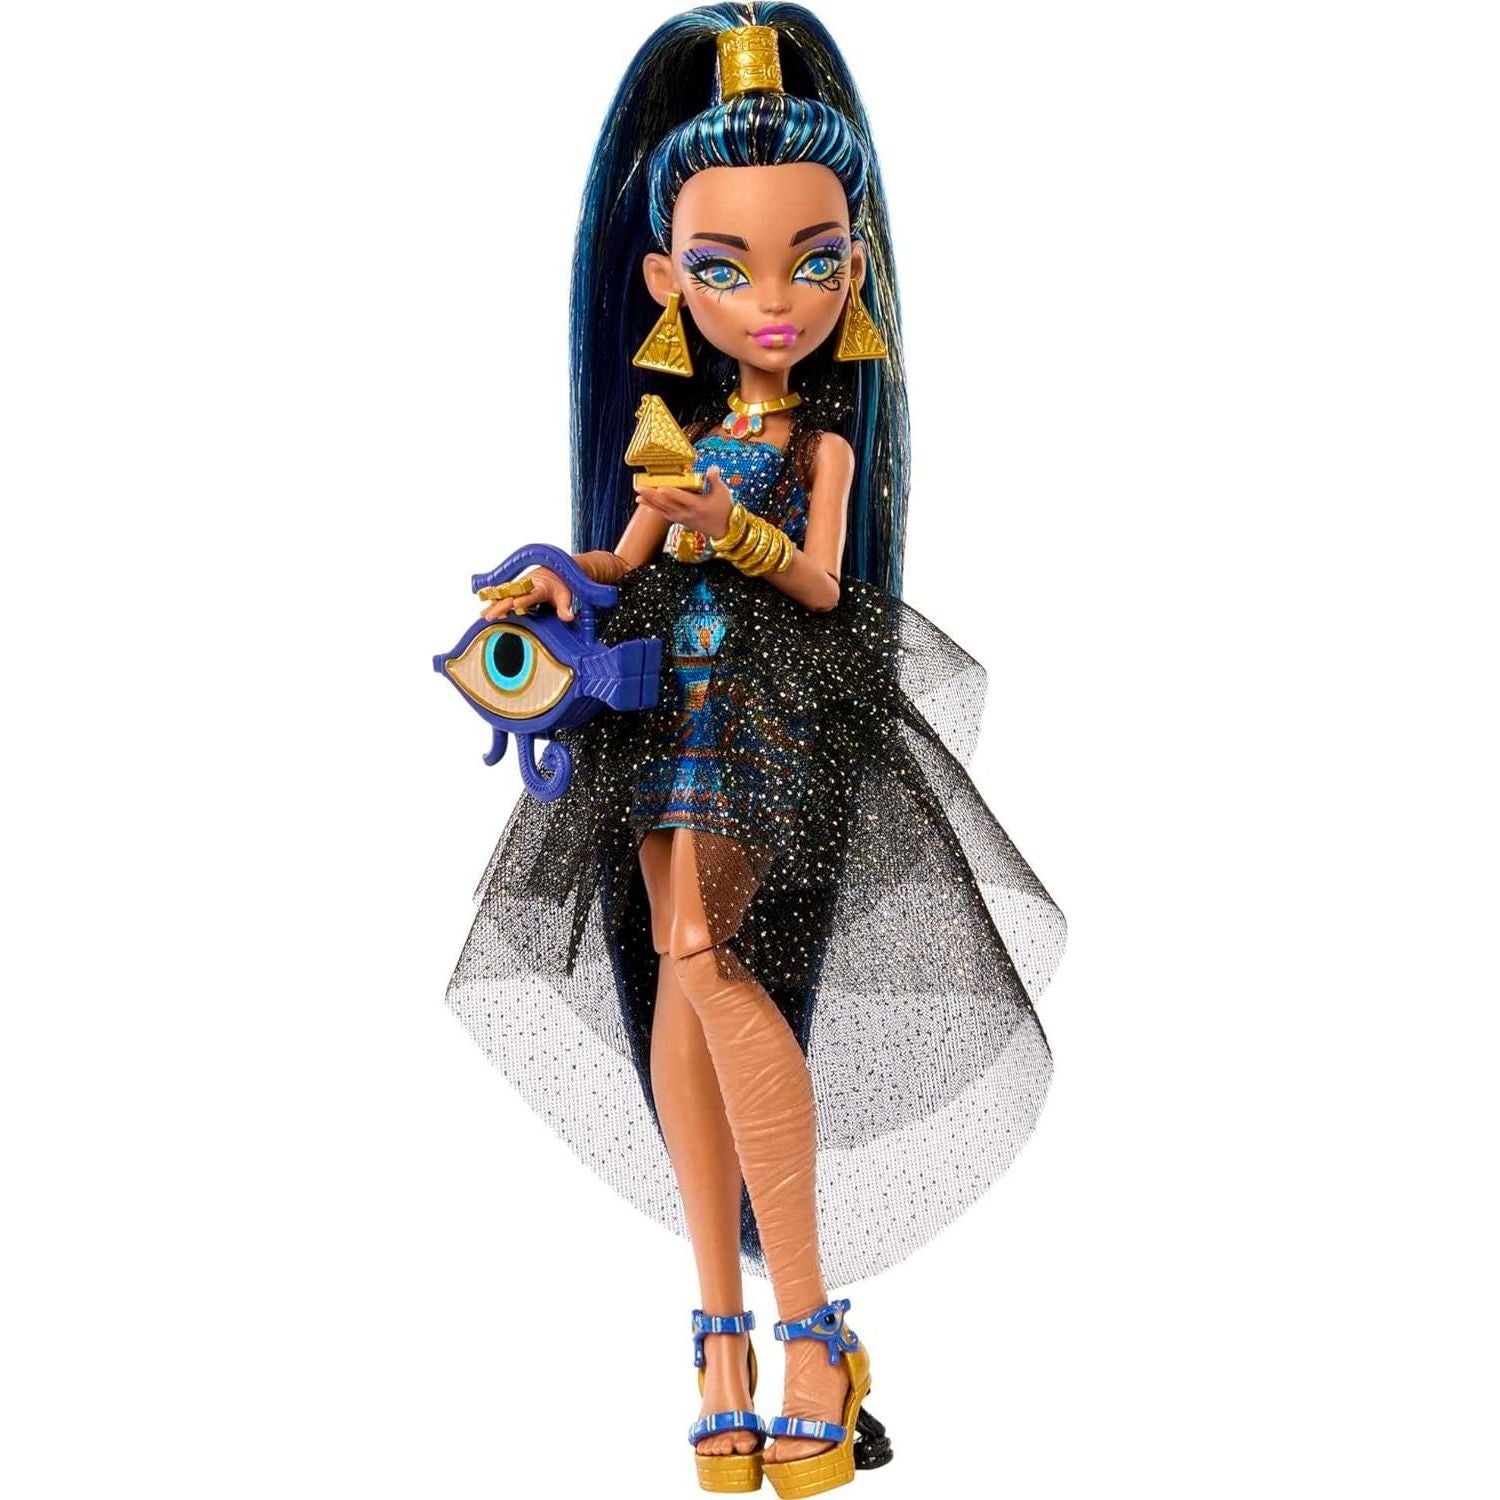 Monster High Cleo De Nile Doll in Monster Ball Party Dress with Themed Accessories Like a Scepter